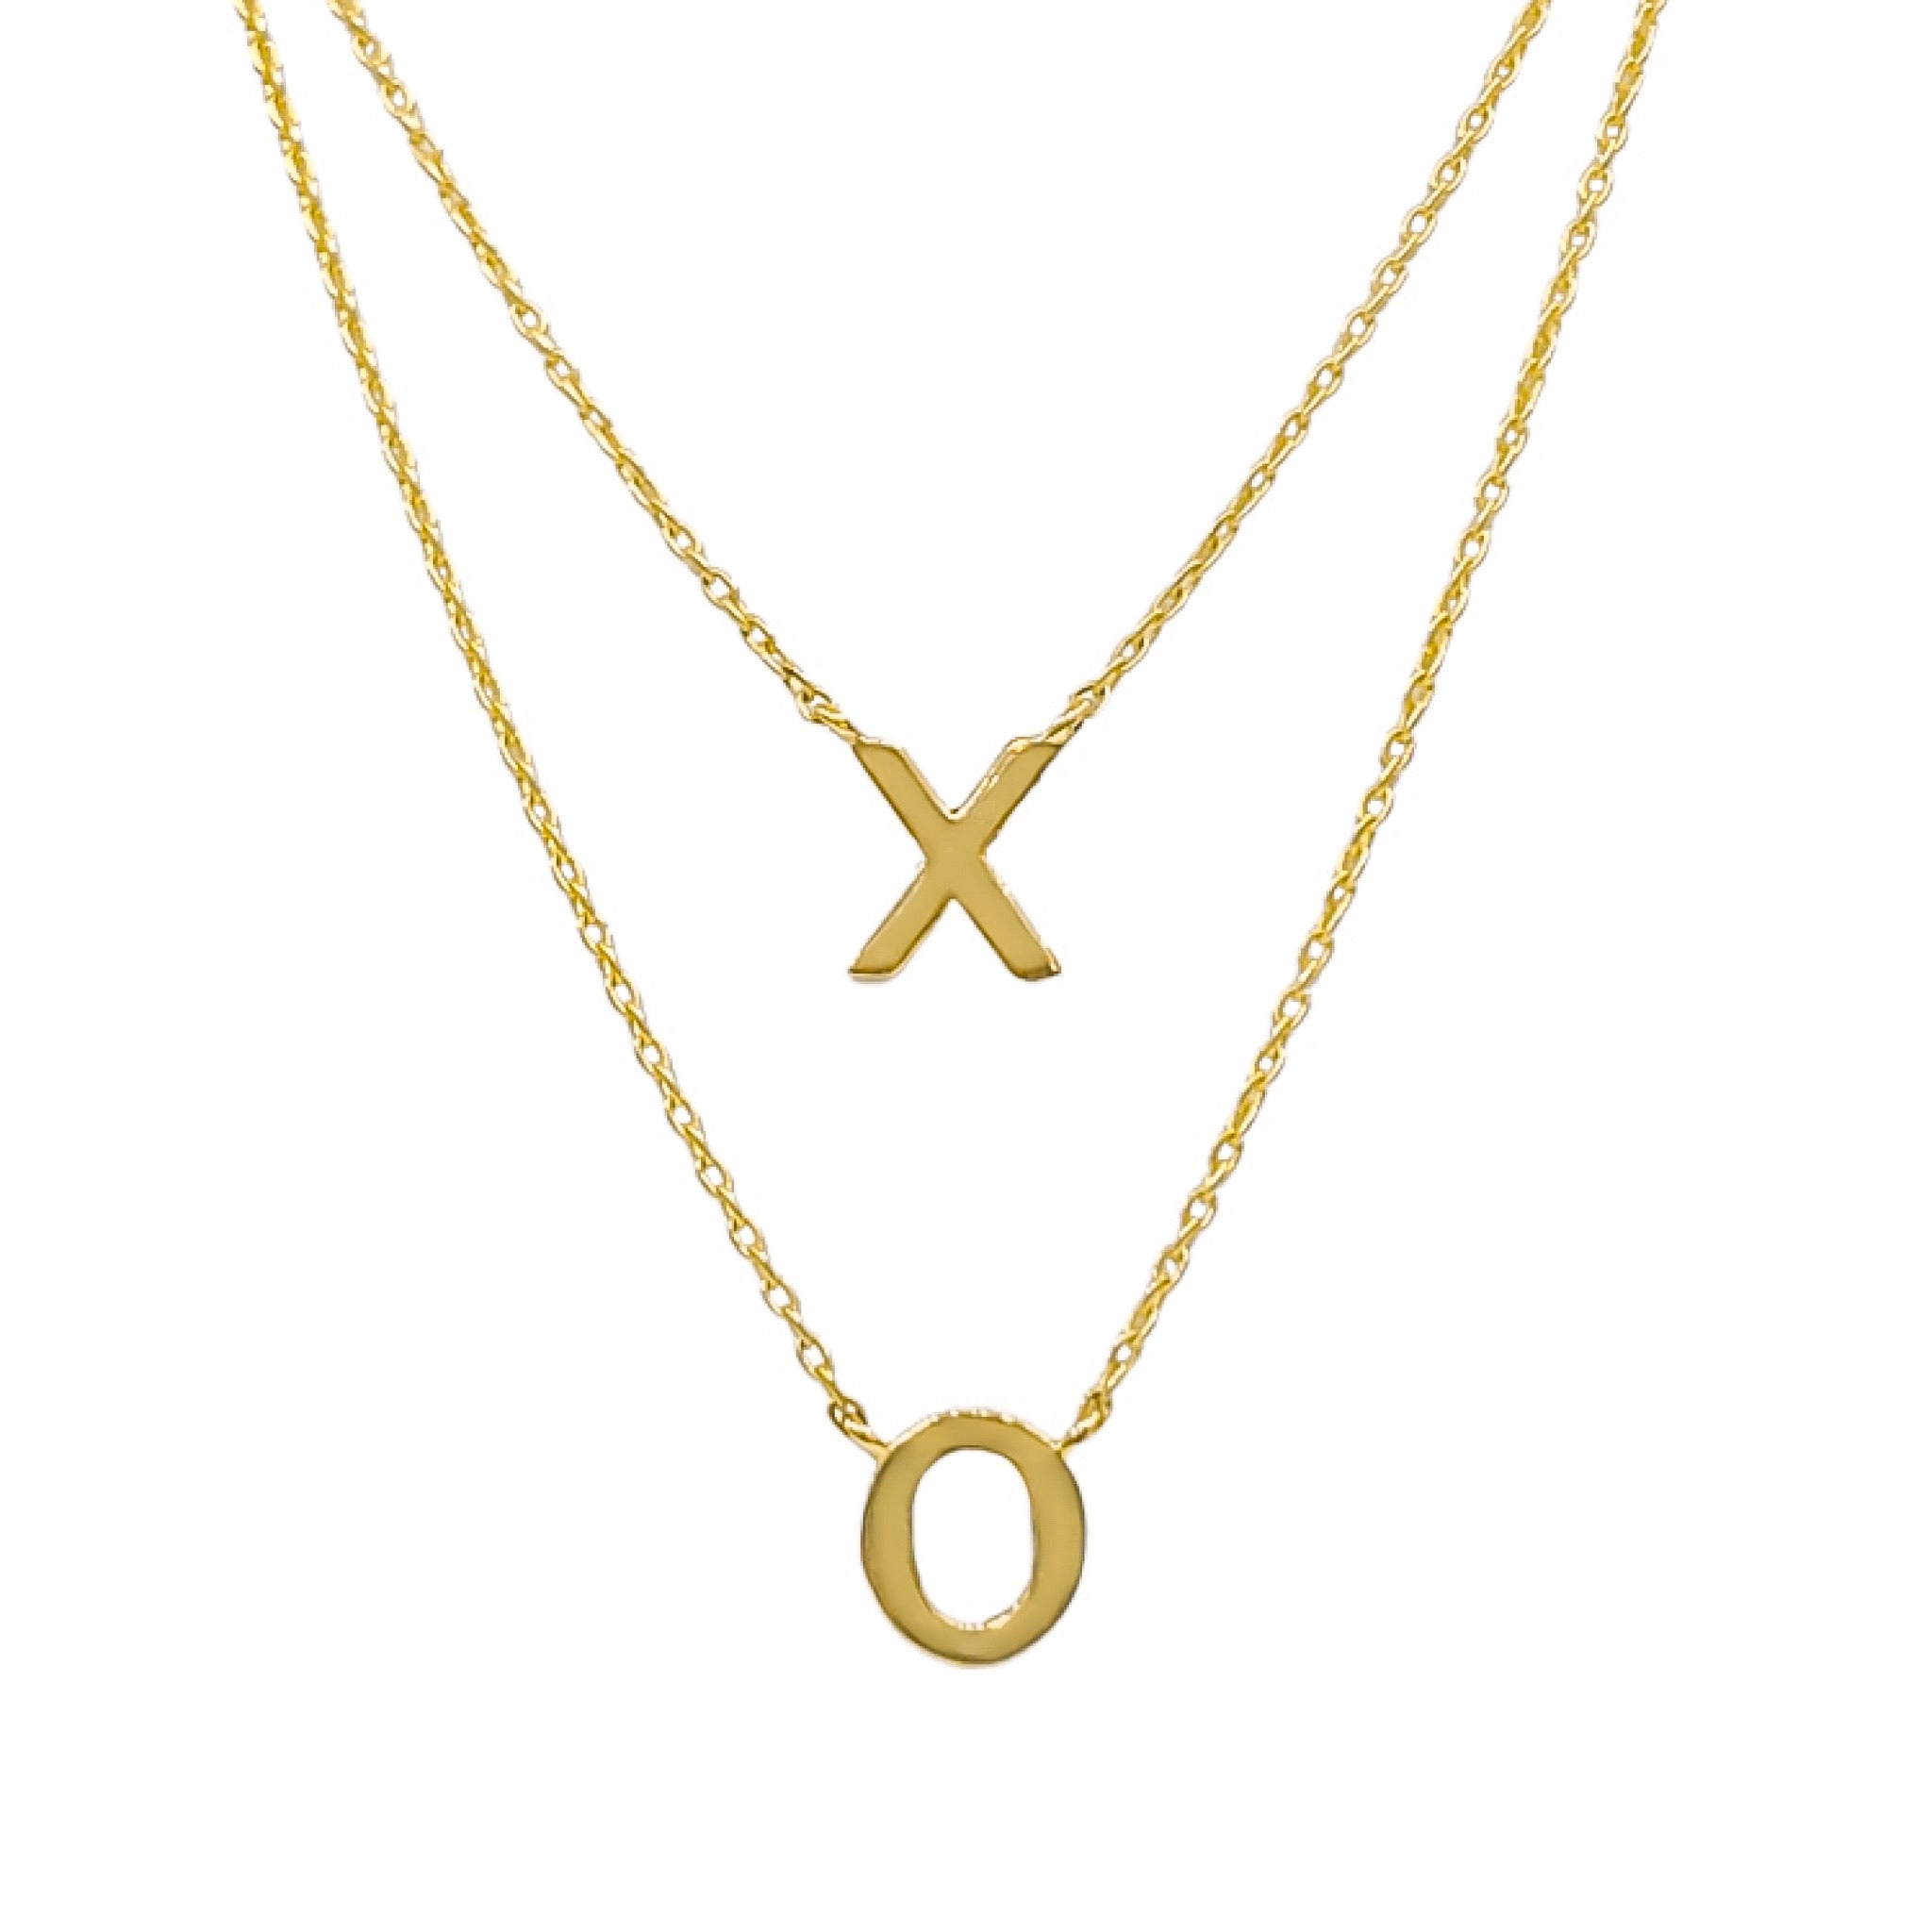 10K YELLOW GOLD DOUBLE XO NECKLACE